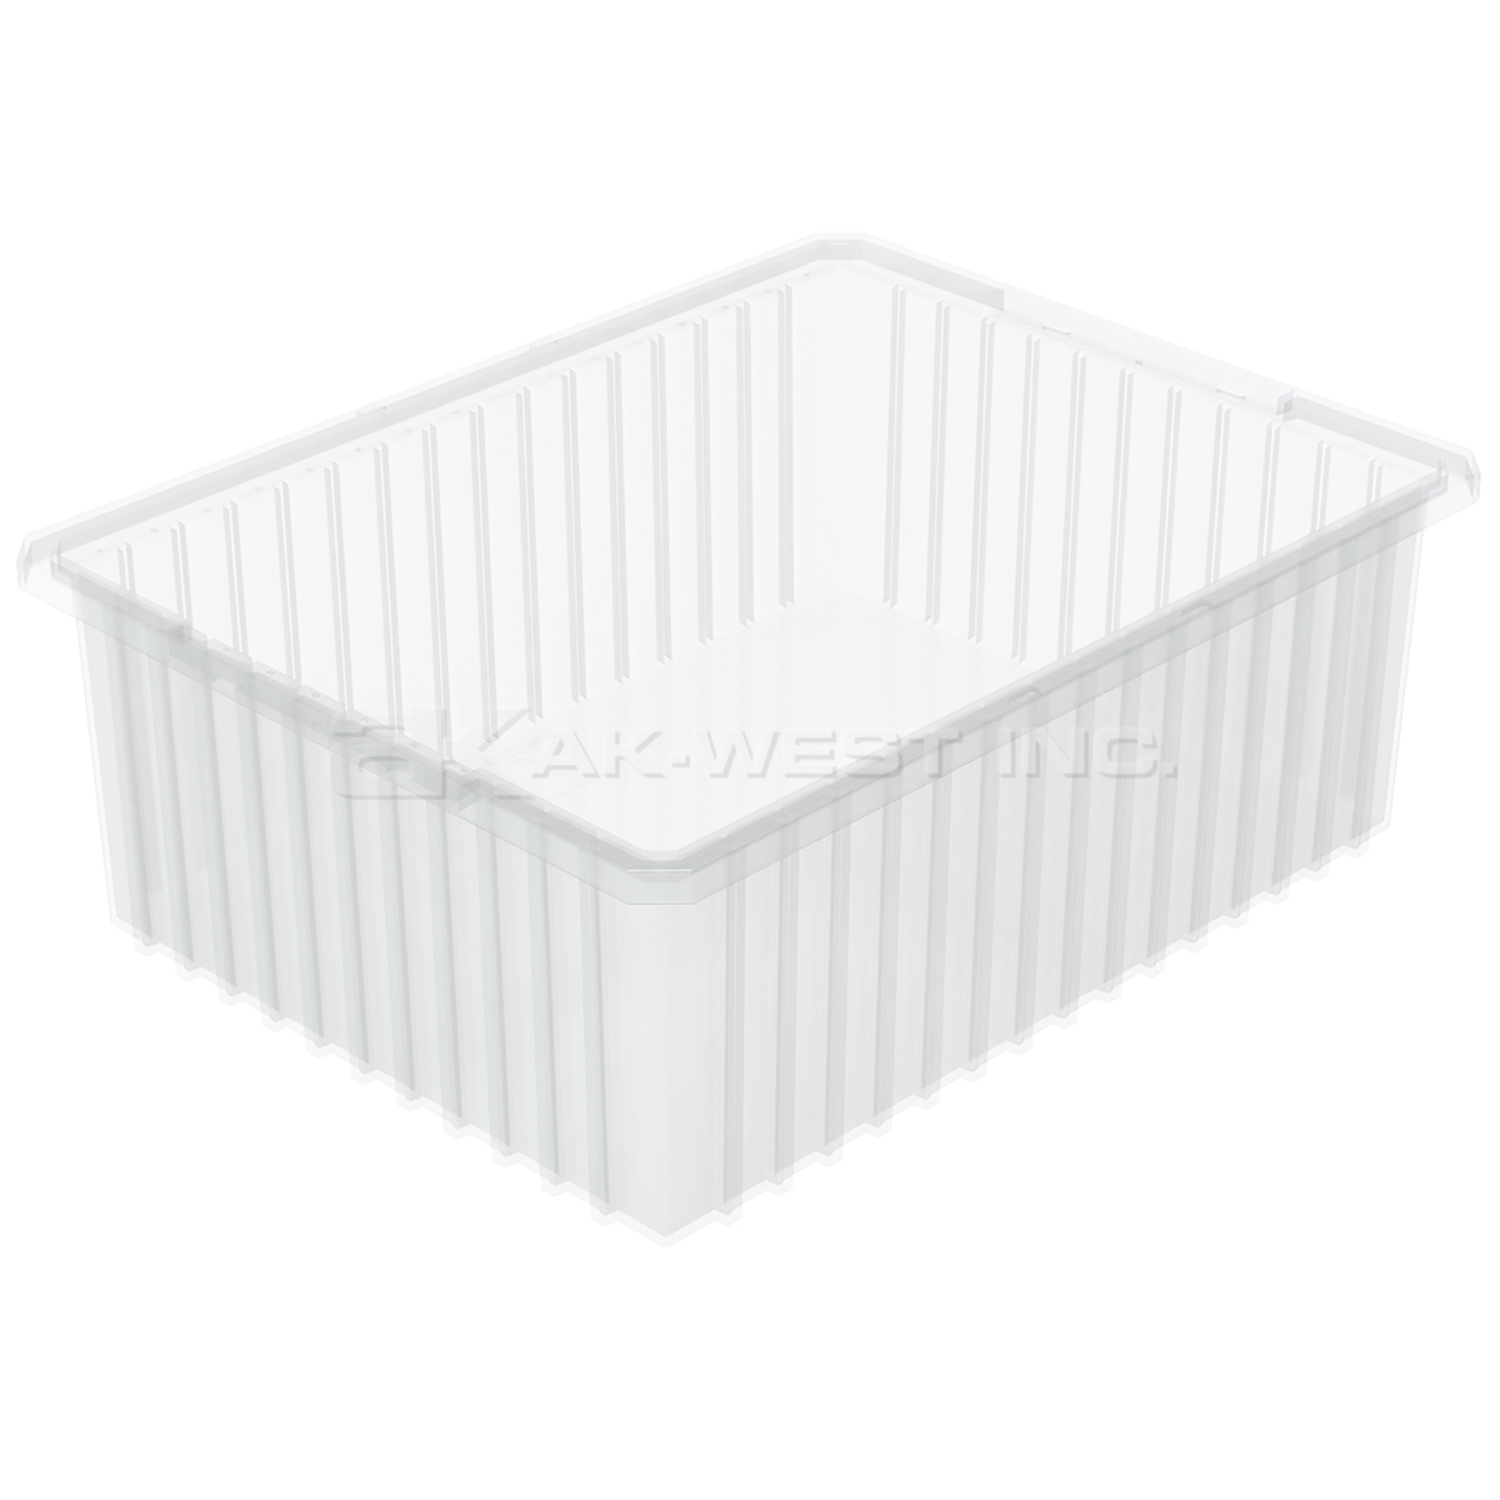 Clear, 22-3/8" x 17-3/8" x 8" Dividable Grid Container (3 Per Carton)